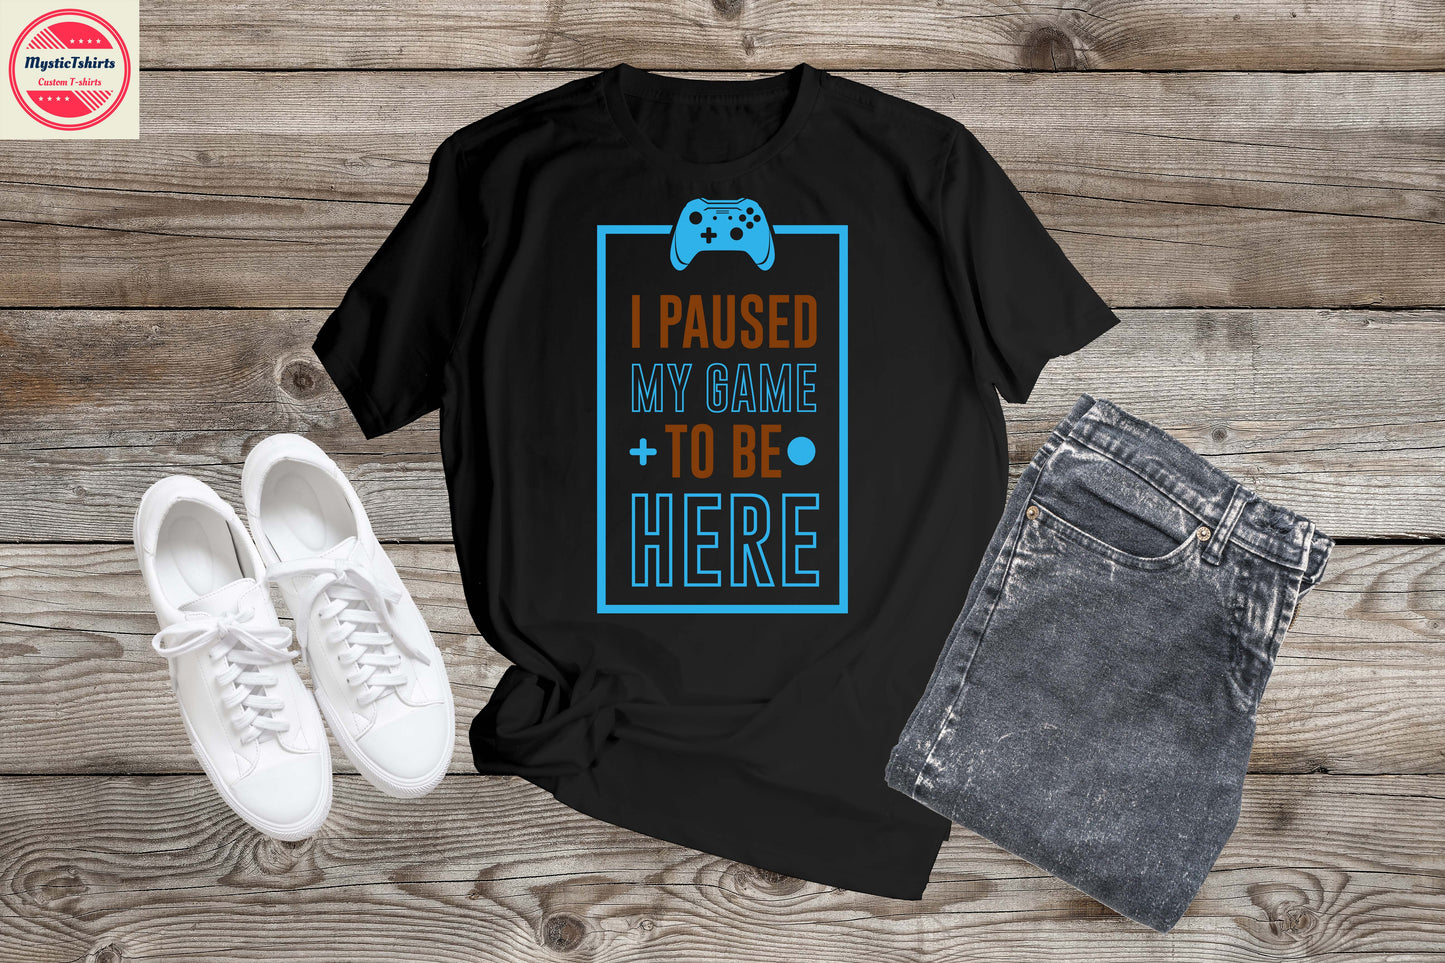 220. I PAUSED MY GAME TO BE HERE, Custom Made Shirt, Personalized T-Shirt, Custom Text, Make Your Own Shirt, Custom Tee